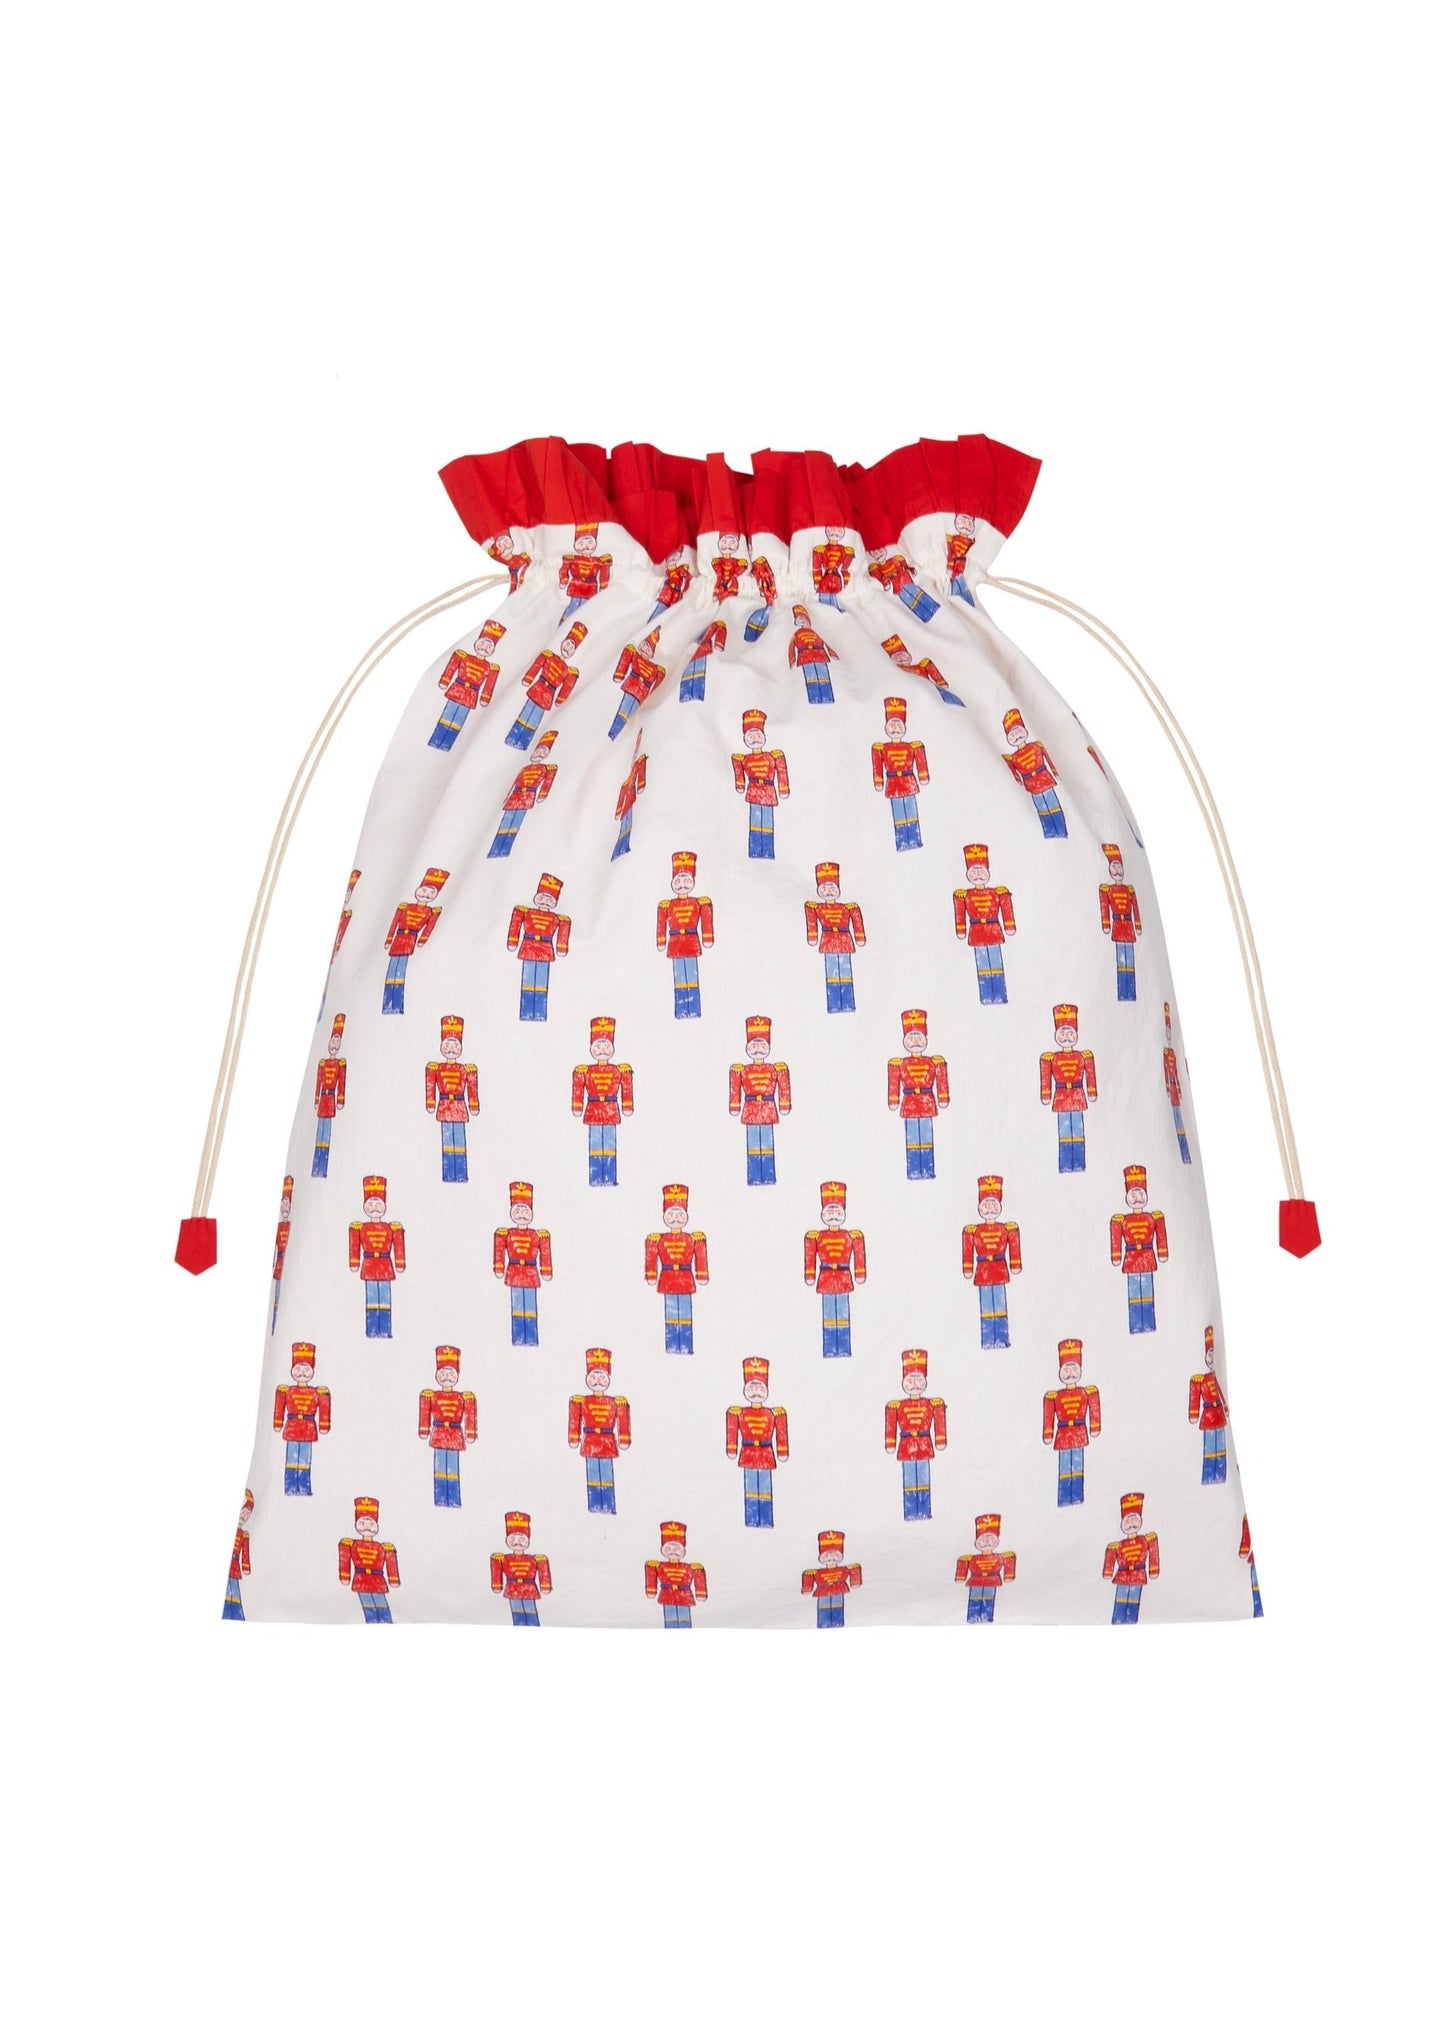 Red Toy Soldier Sack